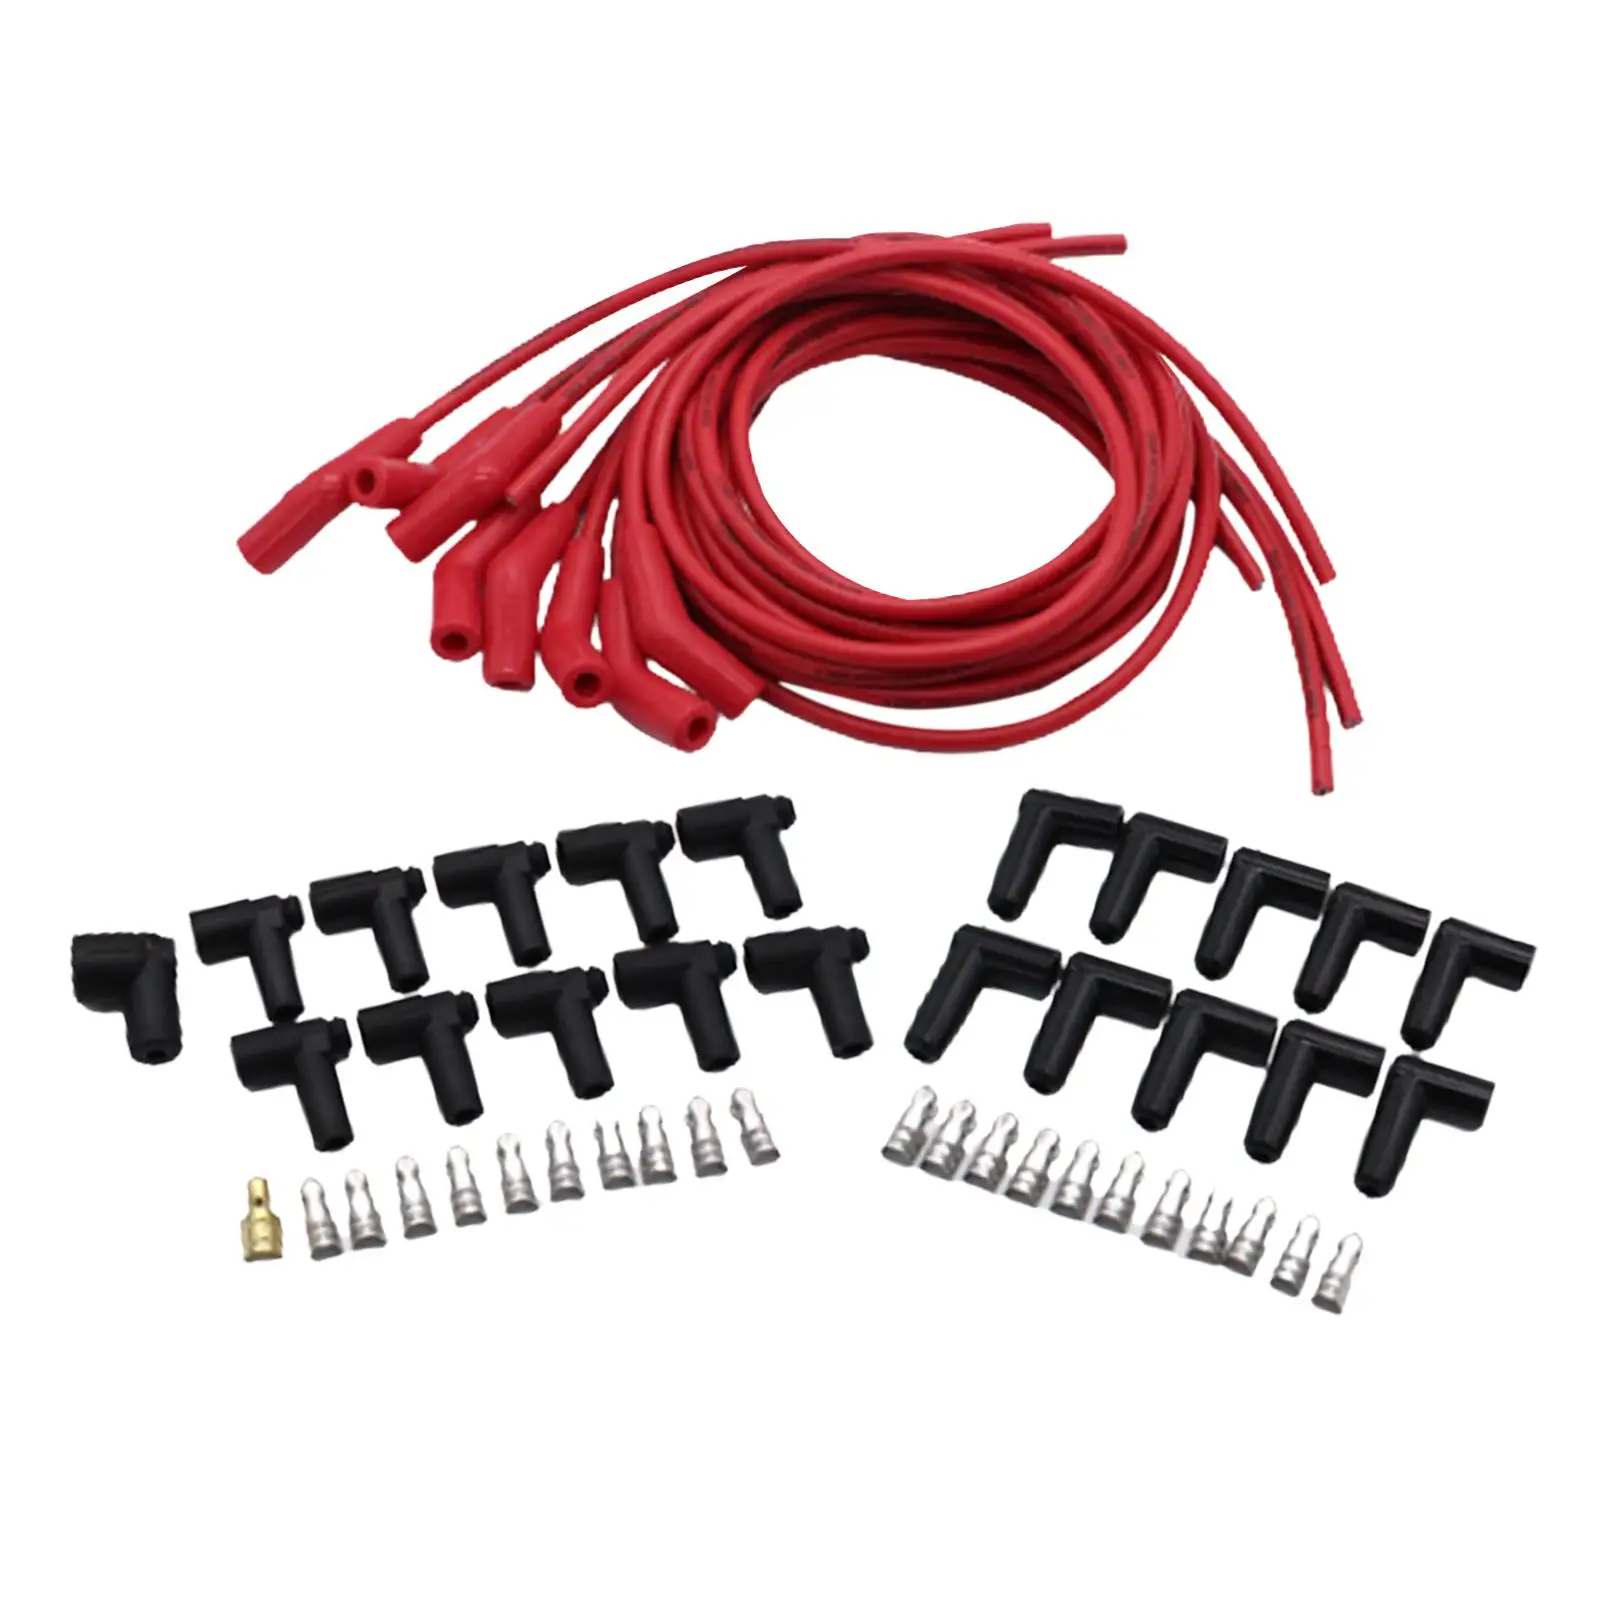 Spark Plug Wire Set Spare Parts Durable Premium Car Accessories with 45/135 Spark Plug Boot Red High Performance for Chevy